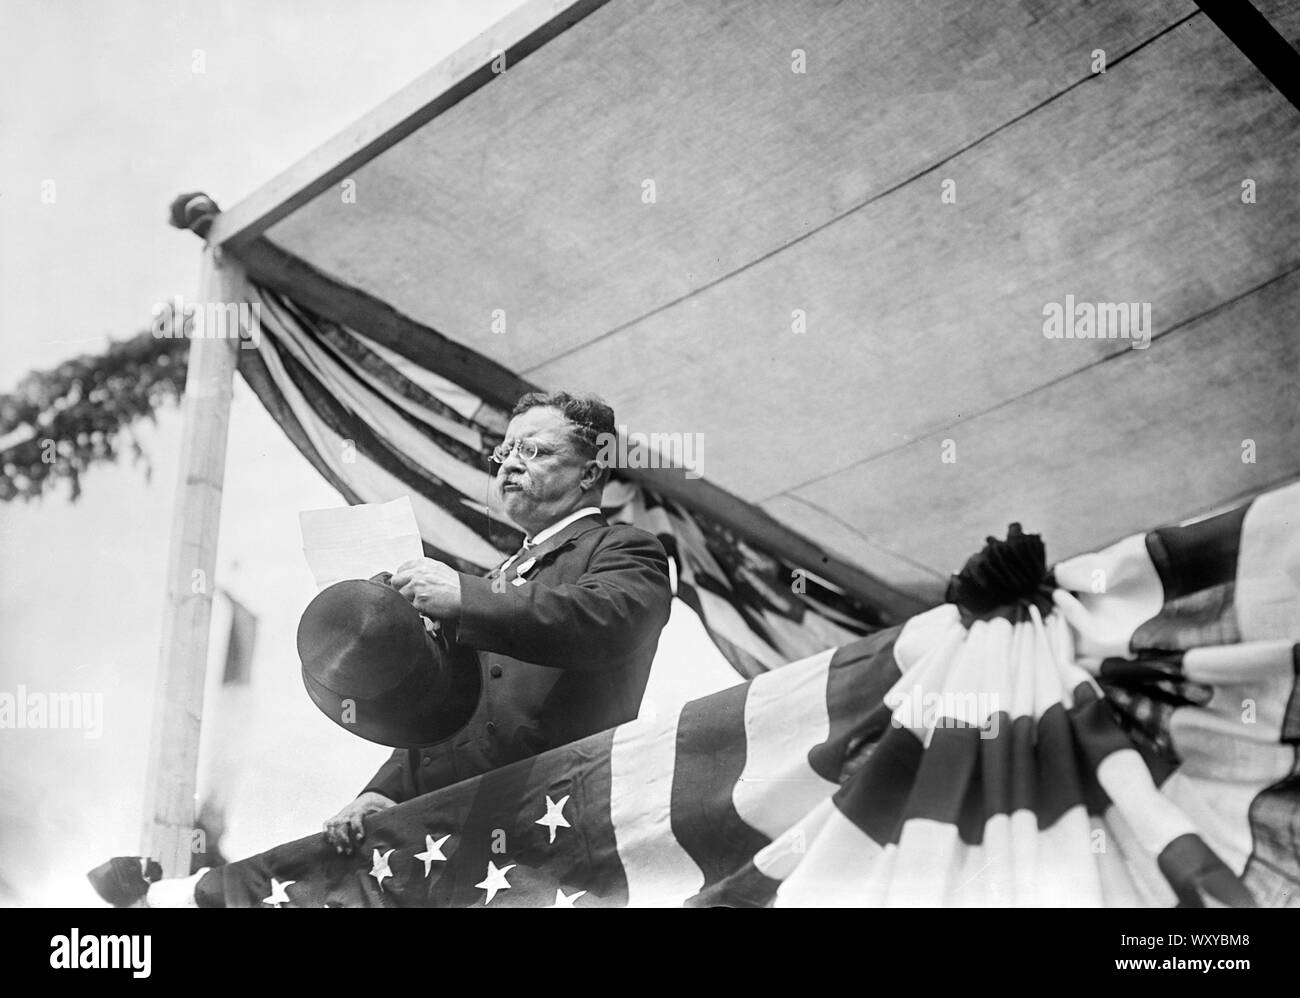 Theodore Roosevelt Addressing Crowd upon Arrival in the United States after Traveling to Europe and Africa for a Year, New York City, New York, USA, Bain News Service, June 18, 1910 Stock Photo